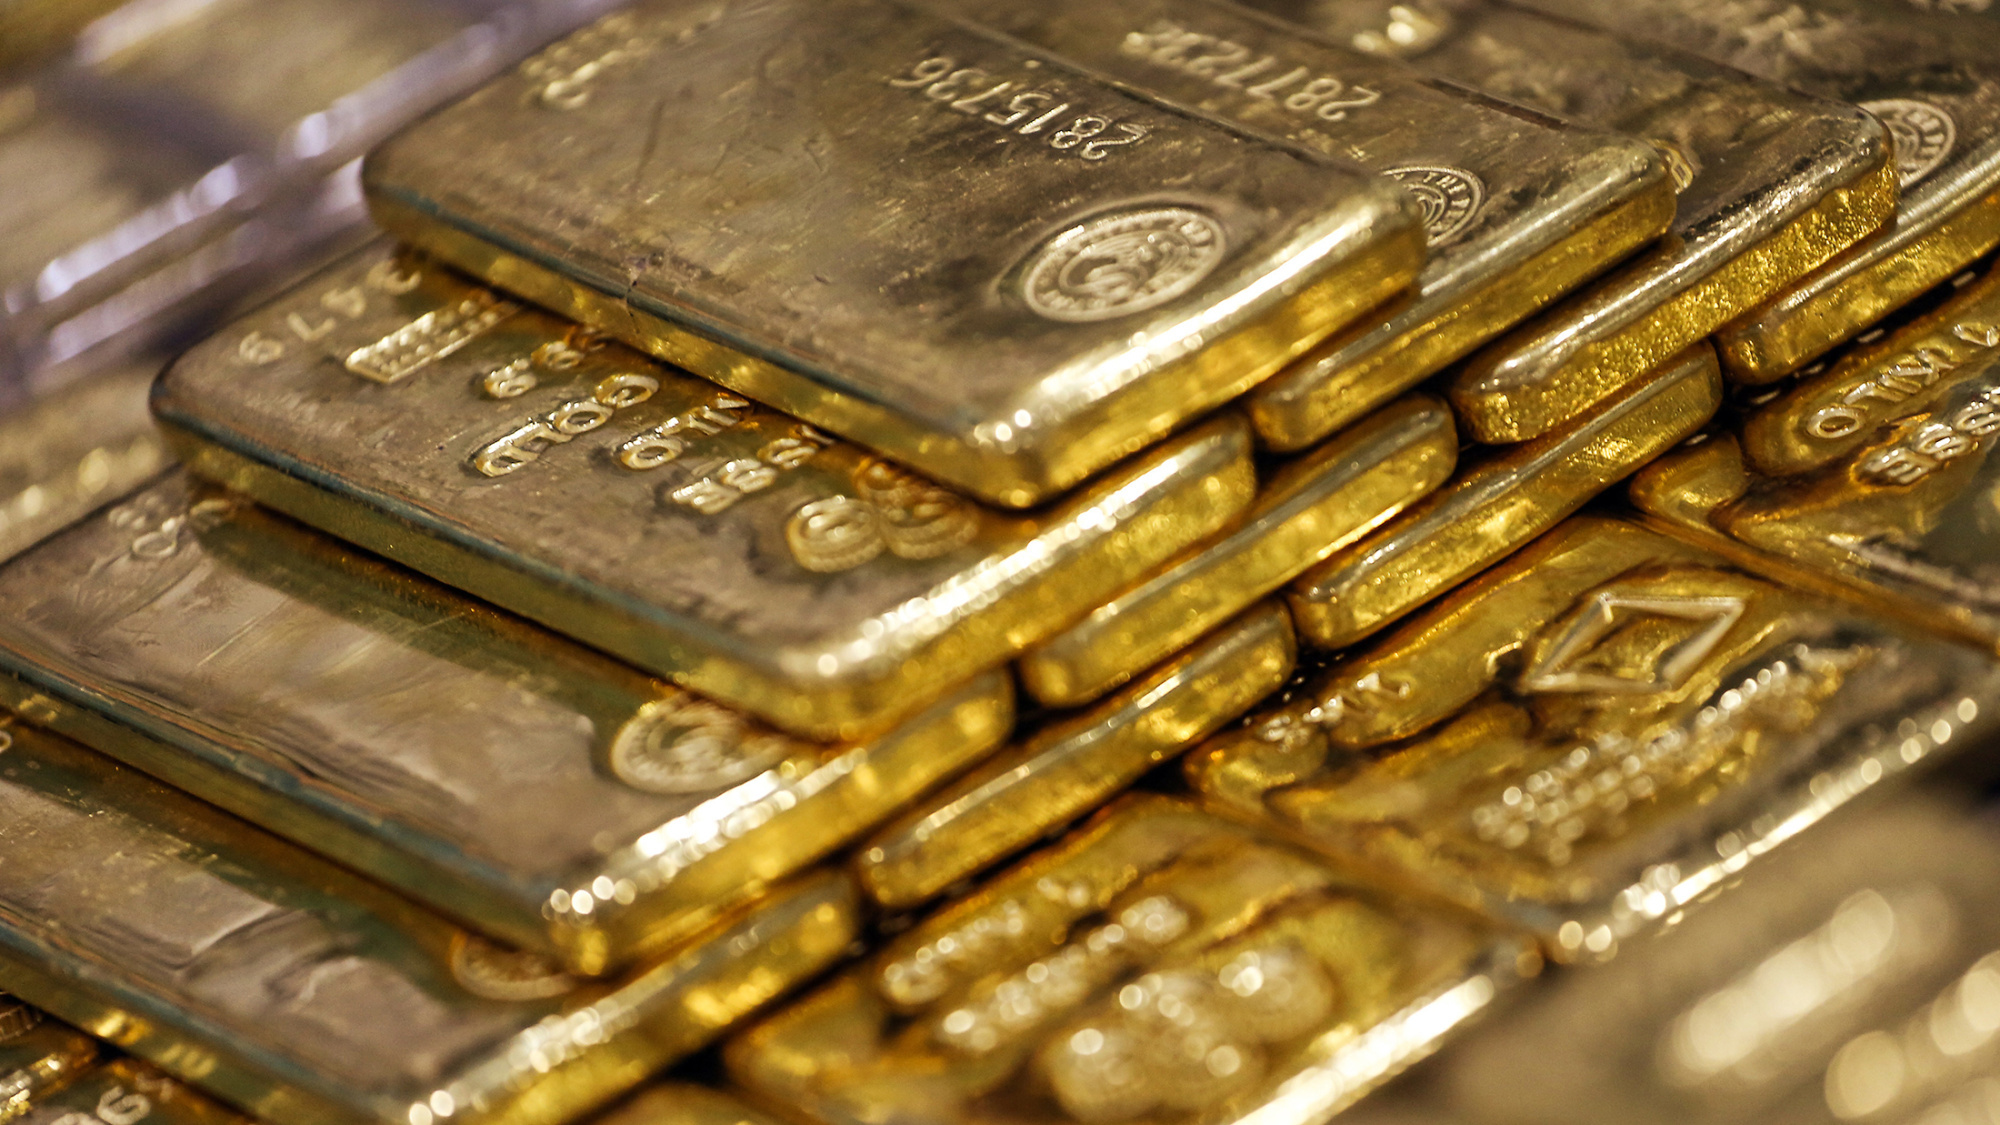 Sri Lanka Navy nabs two attempting to smuggle 7 kg of gold